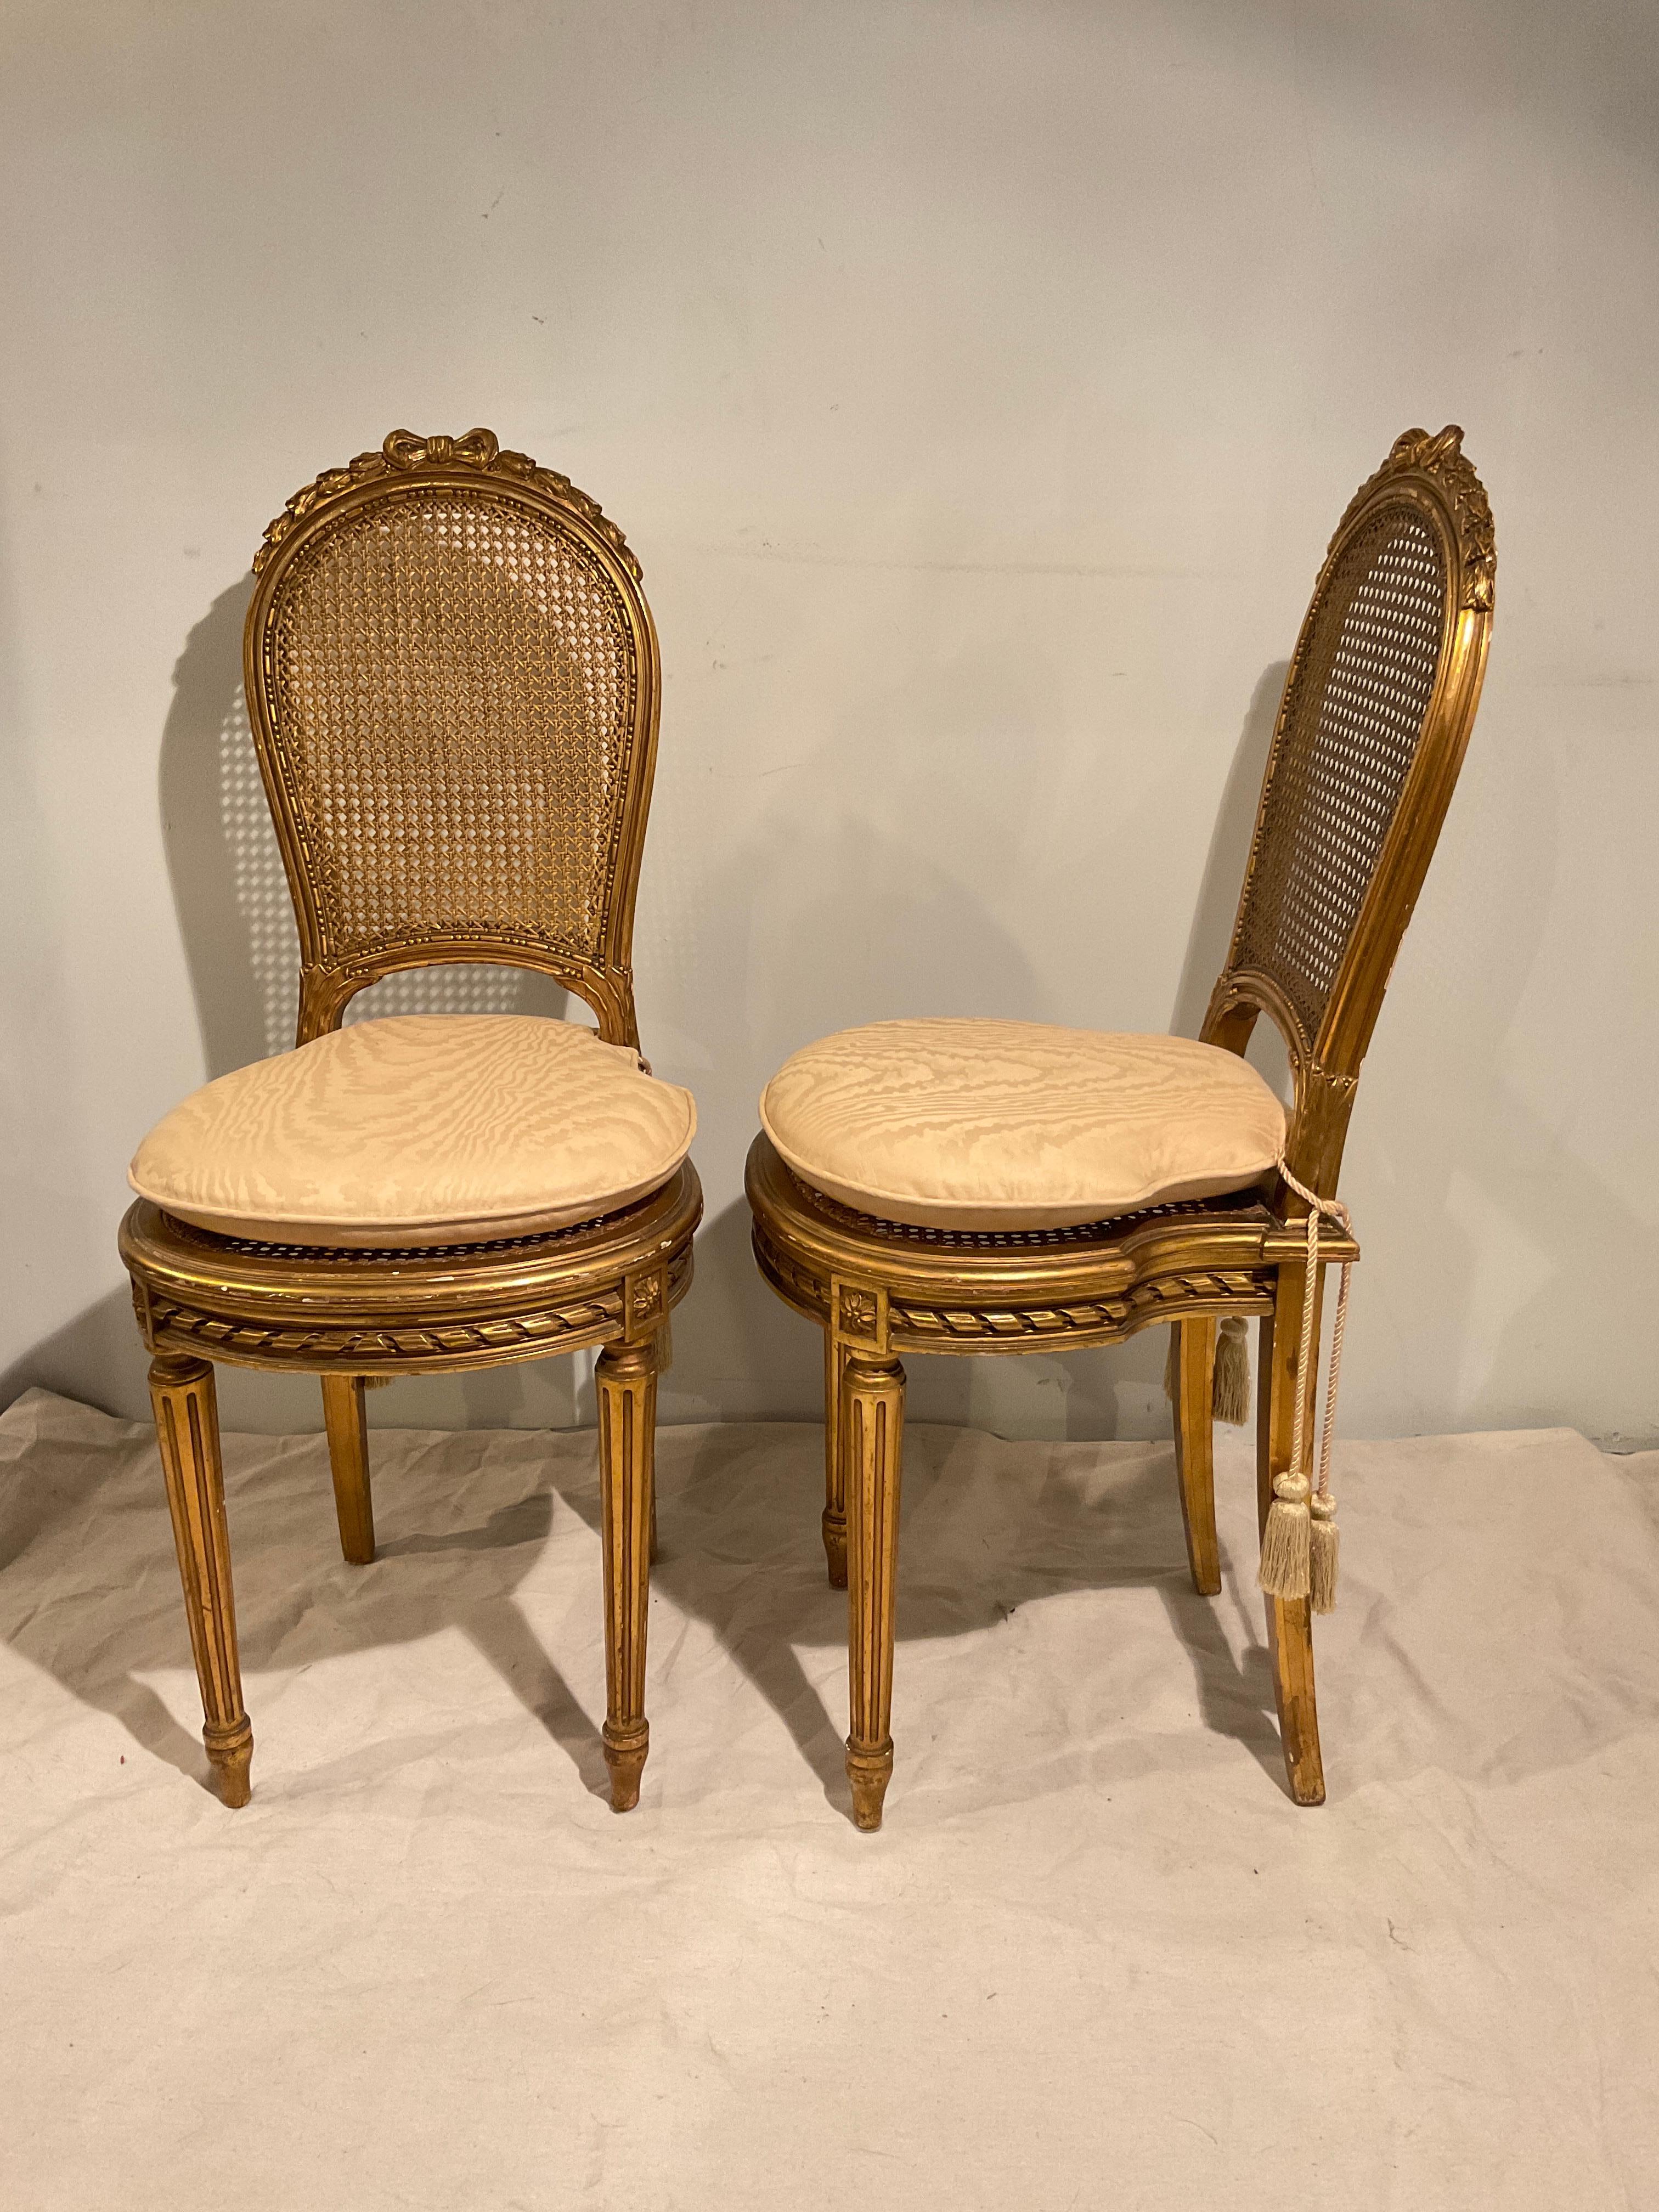 Pair of 1920s gilt wood petite side chairs.